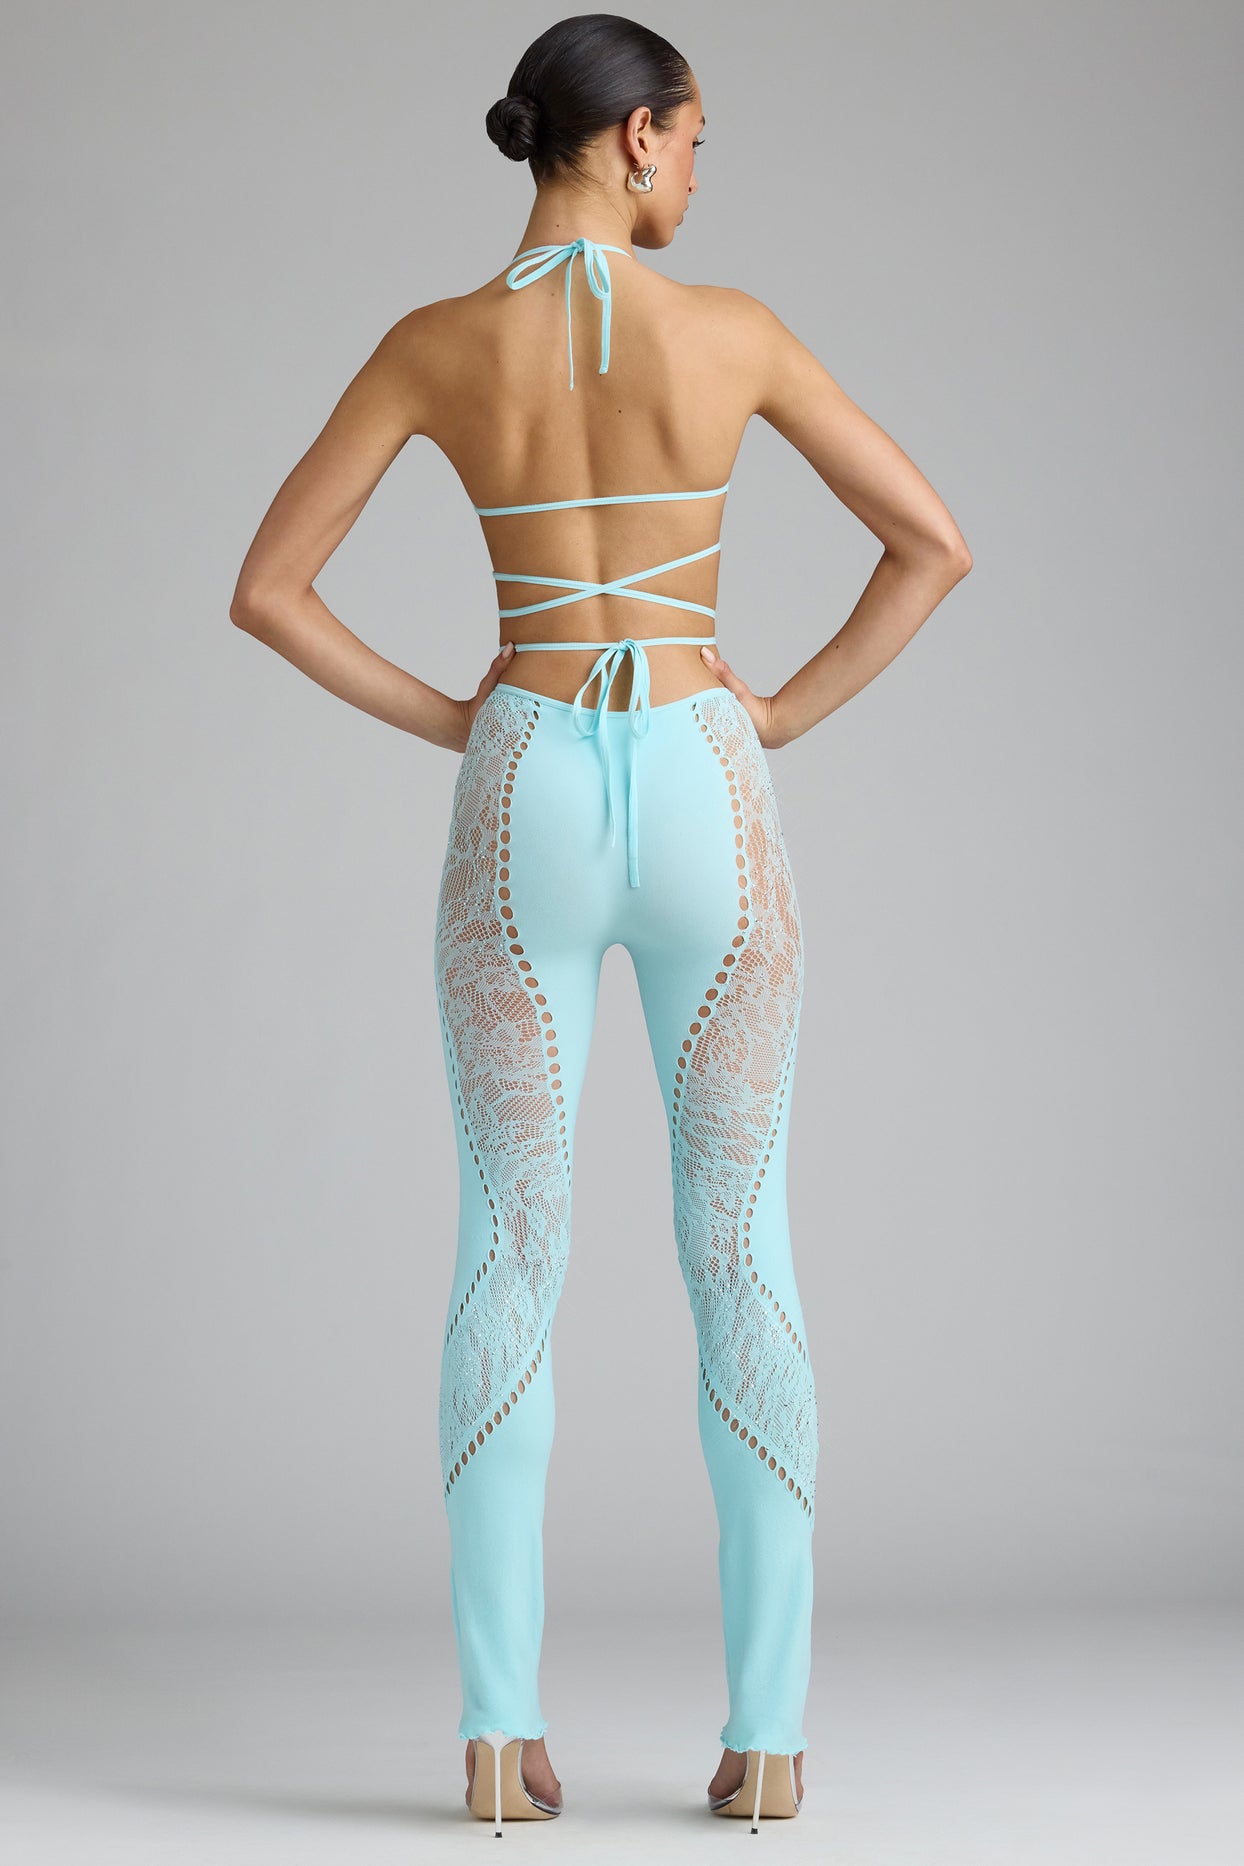 Petite Embellished Mid-Rise Flared Trousers in Ice Blue